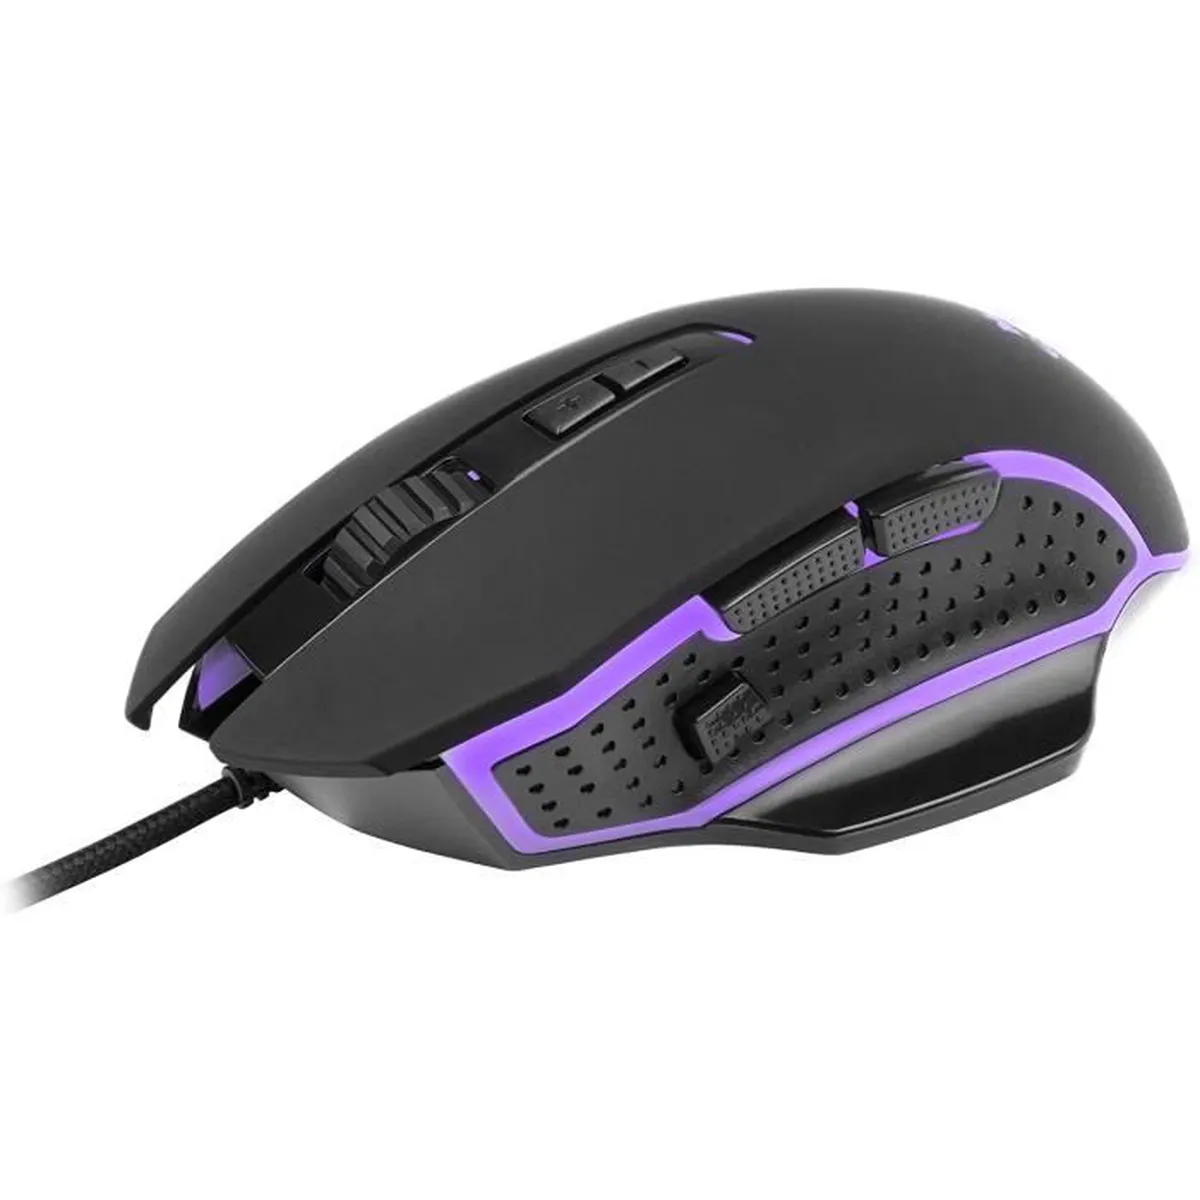 MARS GAMING MM018 MOUSE, SOFTWARE, EXTENDED BASE, RGB